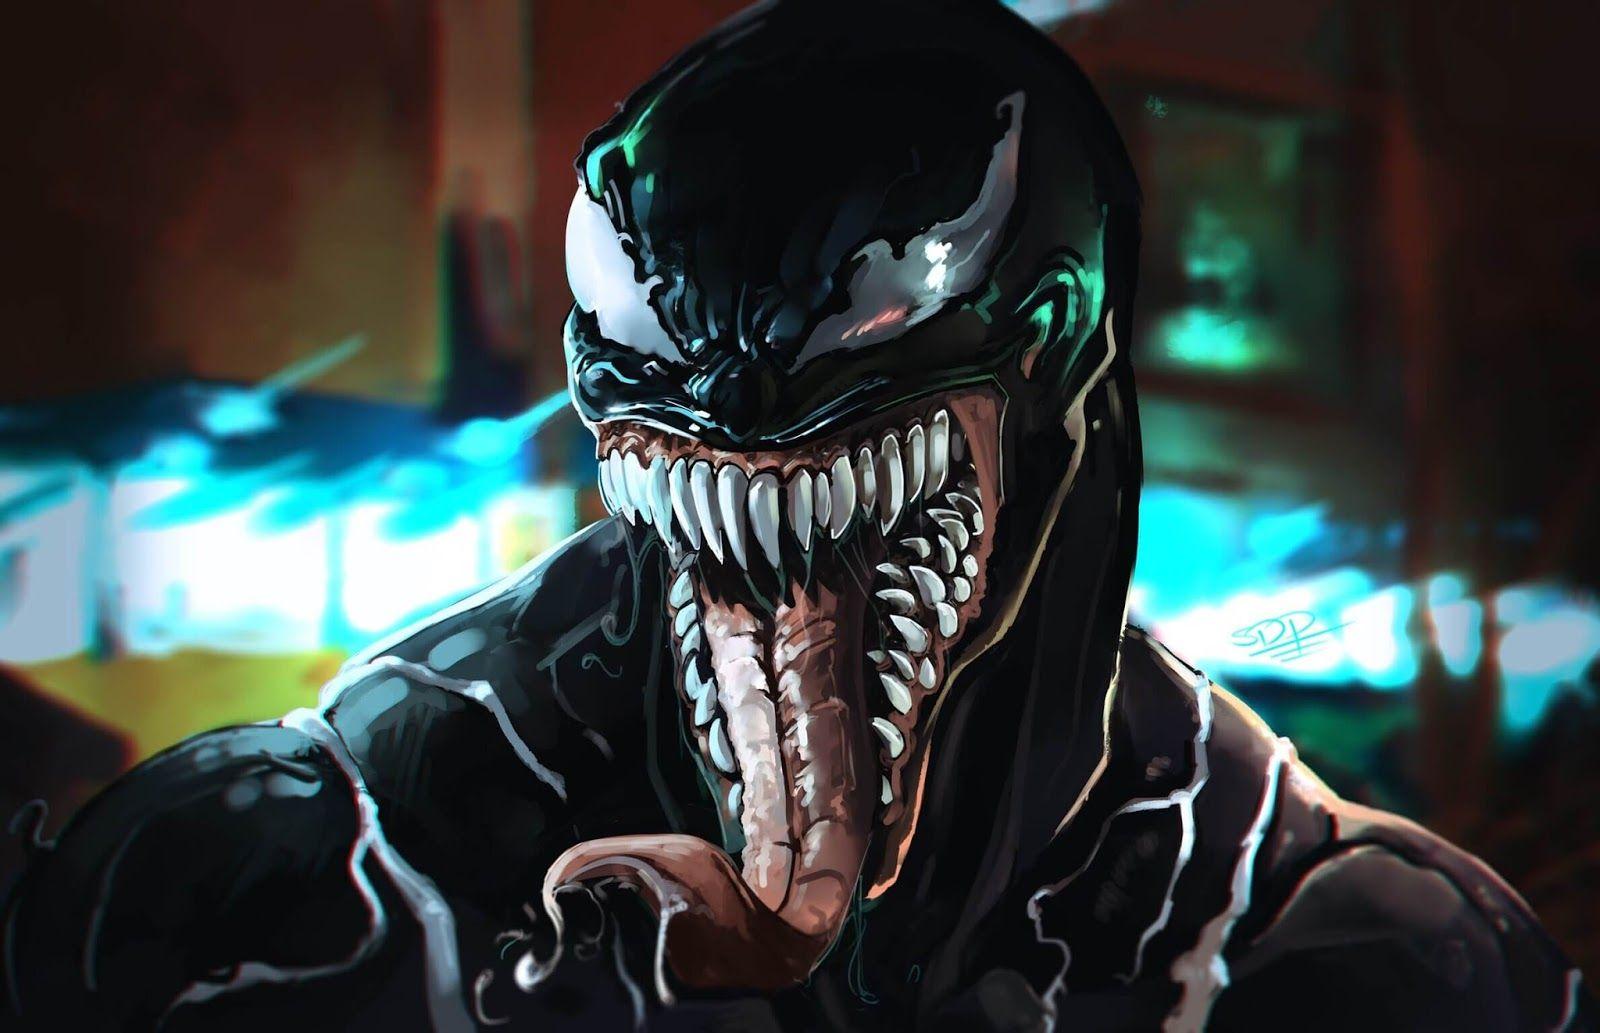 Venom marvel studio's movie you can download HD image, HD picture